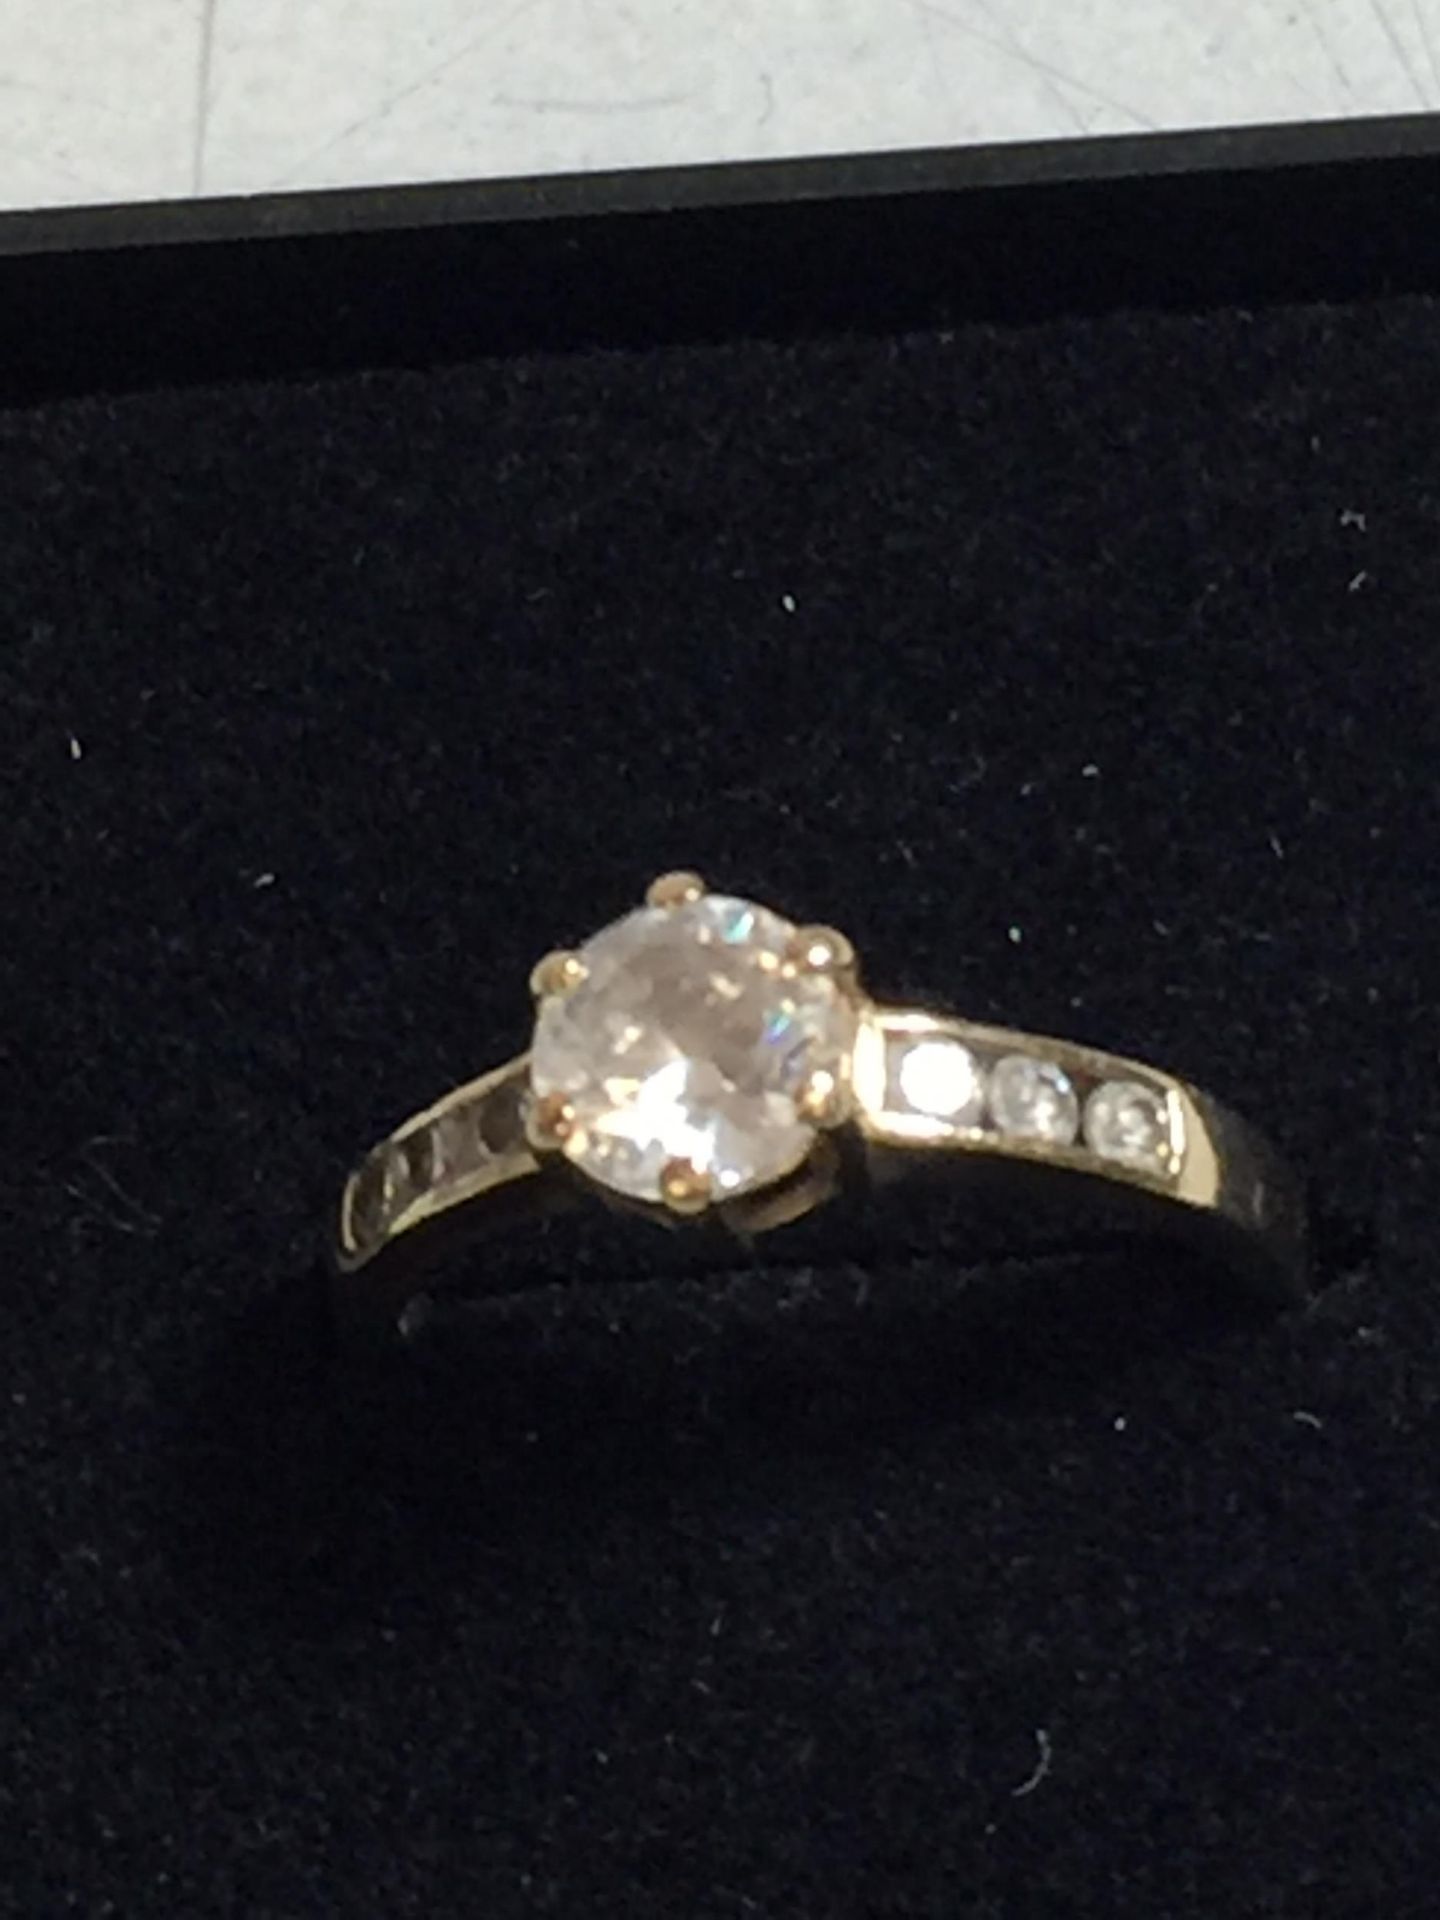 A 9CT GOLD RING WITH CZ STONES, WEIGHT 2.2G, SIZE M